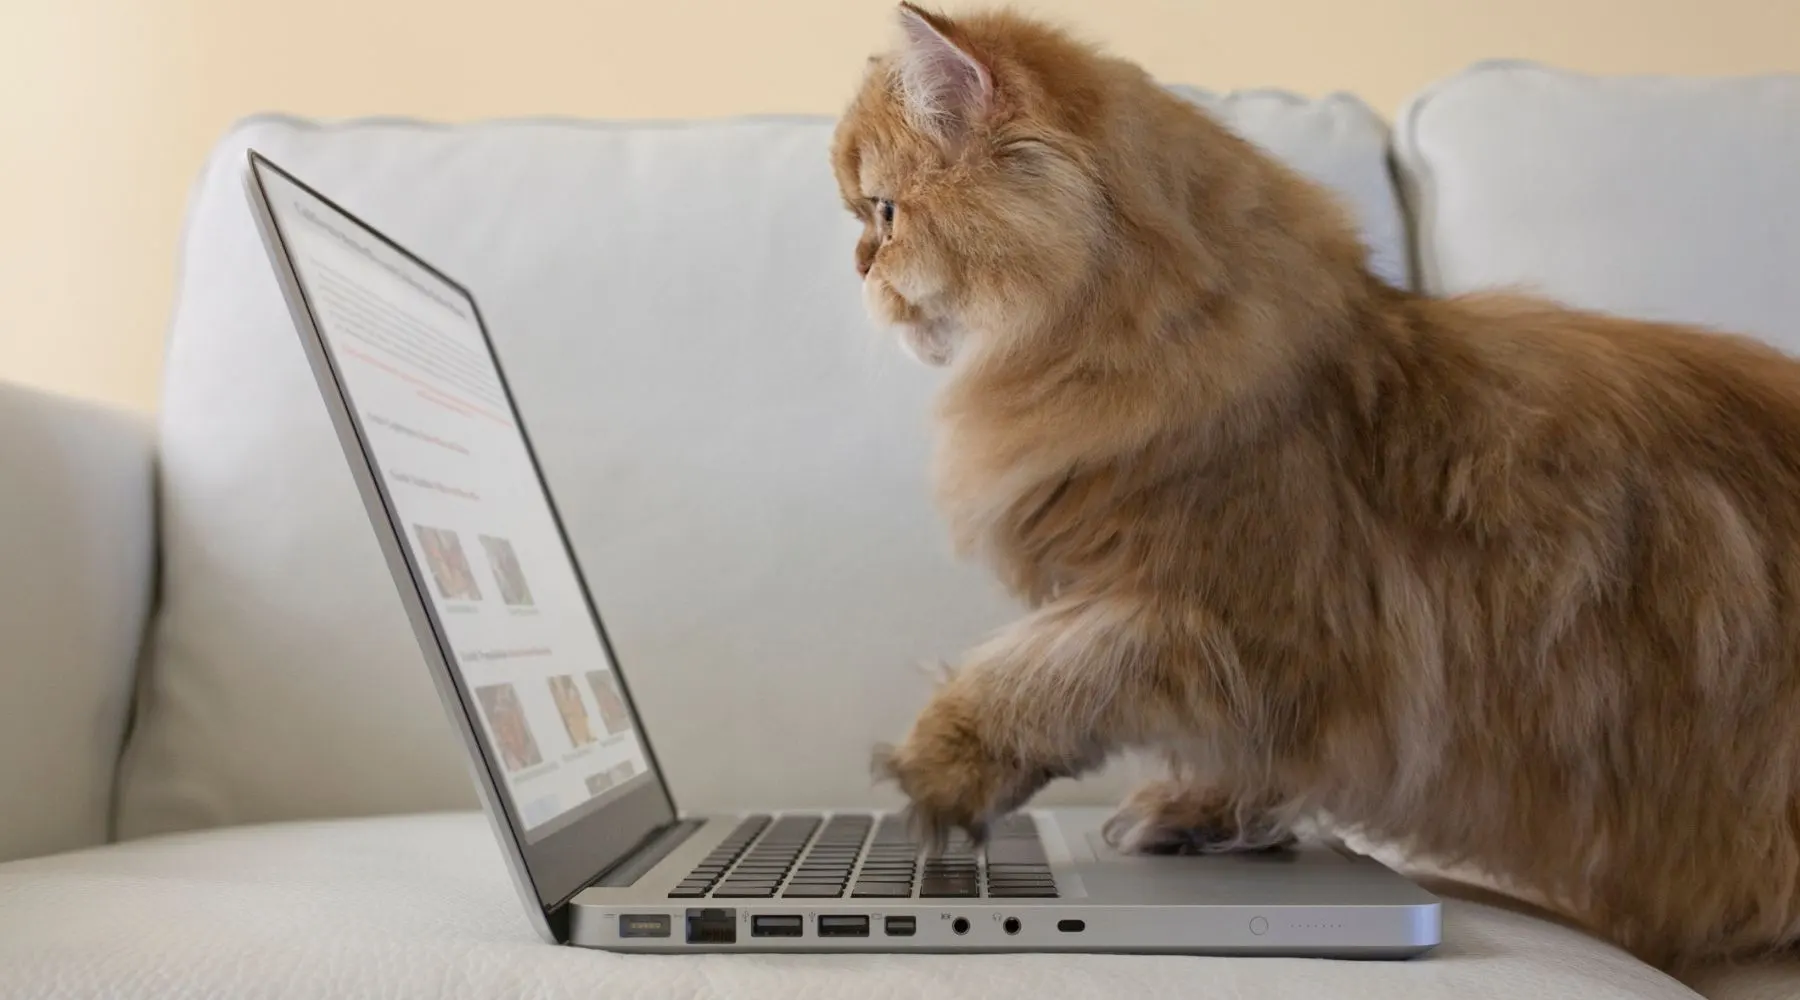 A ginger cat looks at a laptop.